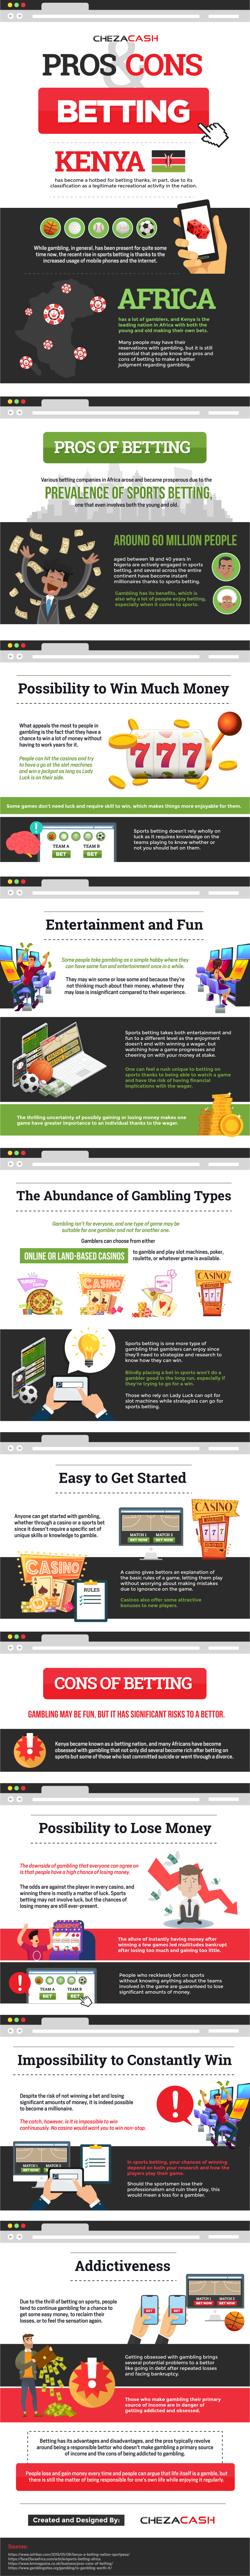 Pros and Cons of Betting #infographic